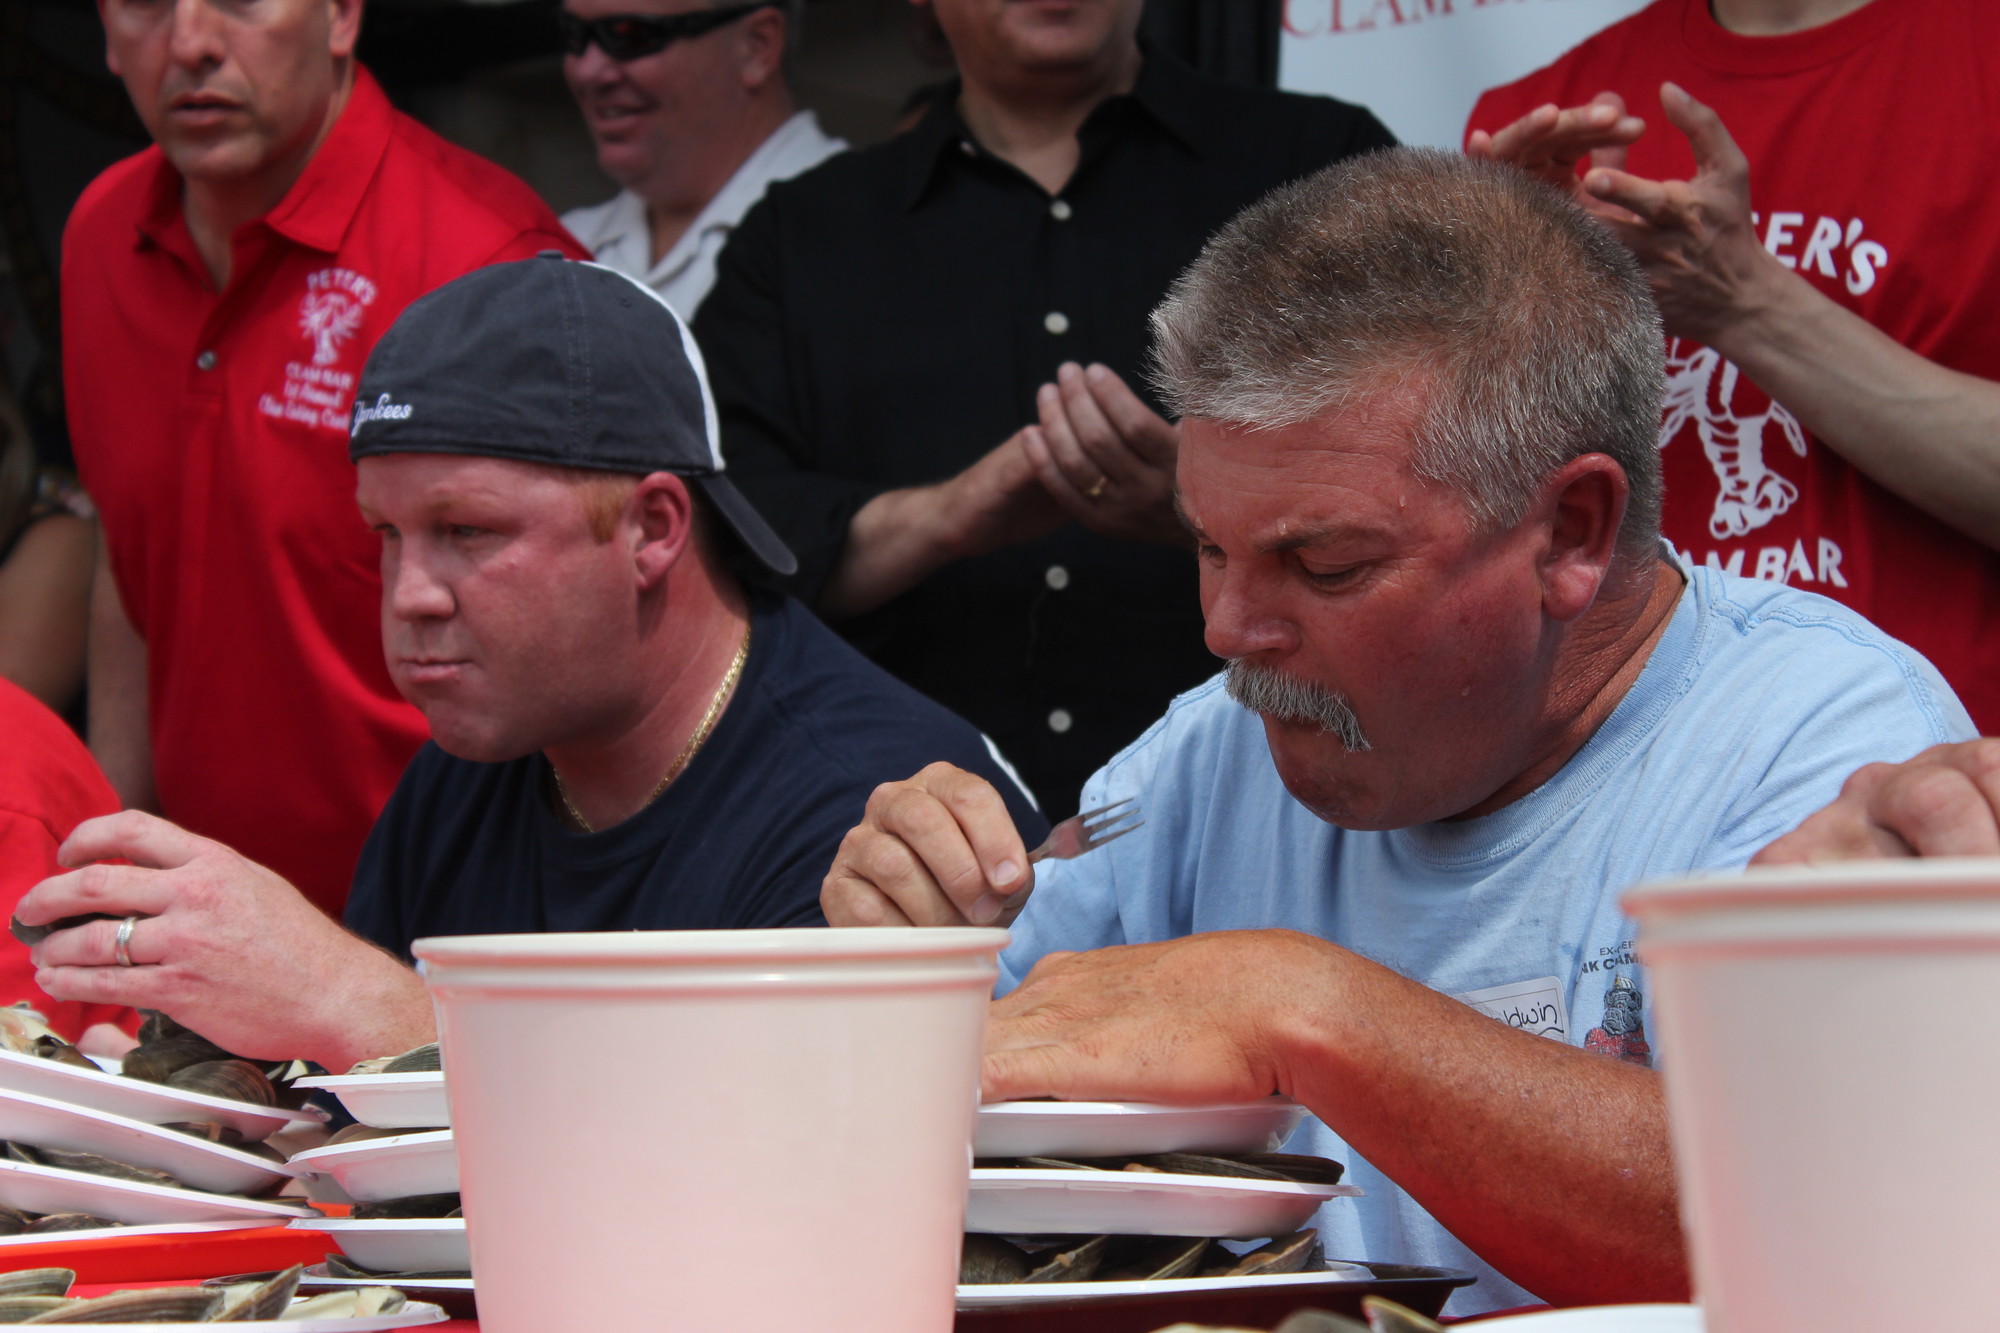 Bob McKenna, left, and Chris Neville worked their way through plates of clams to make a good showing for the Baldwin Fire Department in the first Clam Eating Contest at Peter’s Clam Bar in Island Park last Sunday.